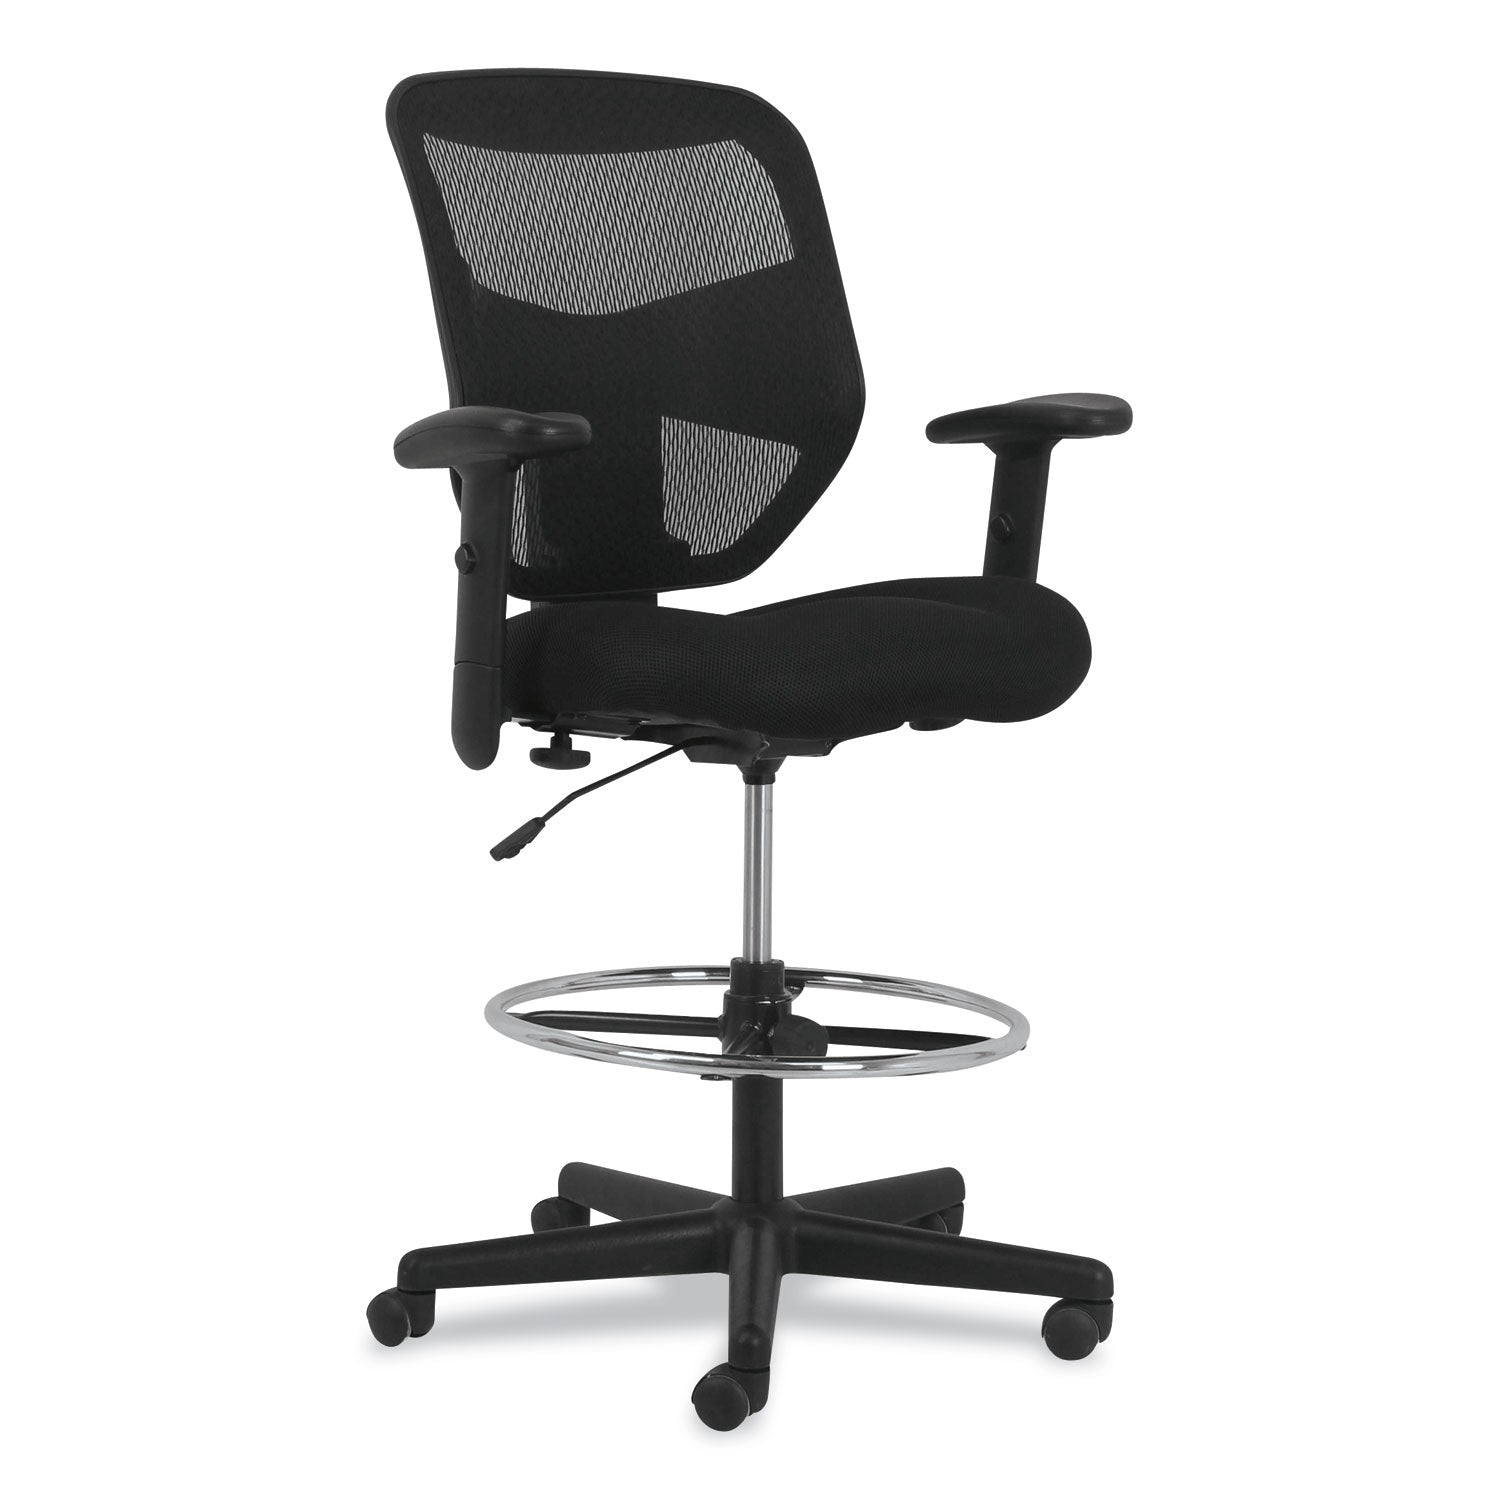 prominent-high-back-task-stool-supports-up-to-250-lb-21-to-281-seat-height-black_honvl539mm10 - 7